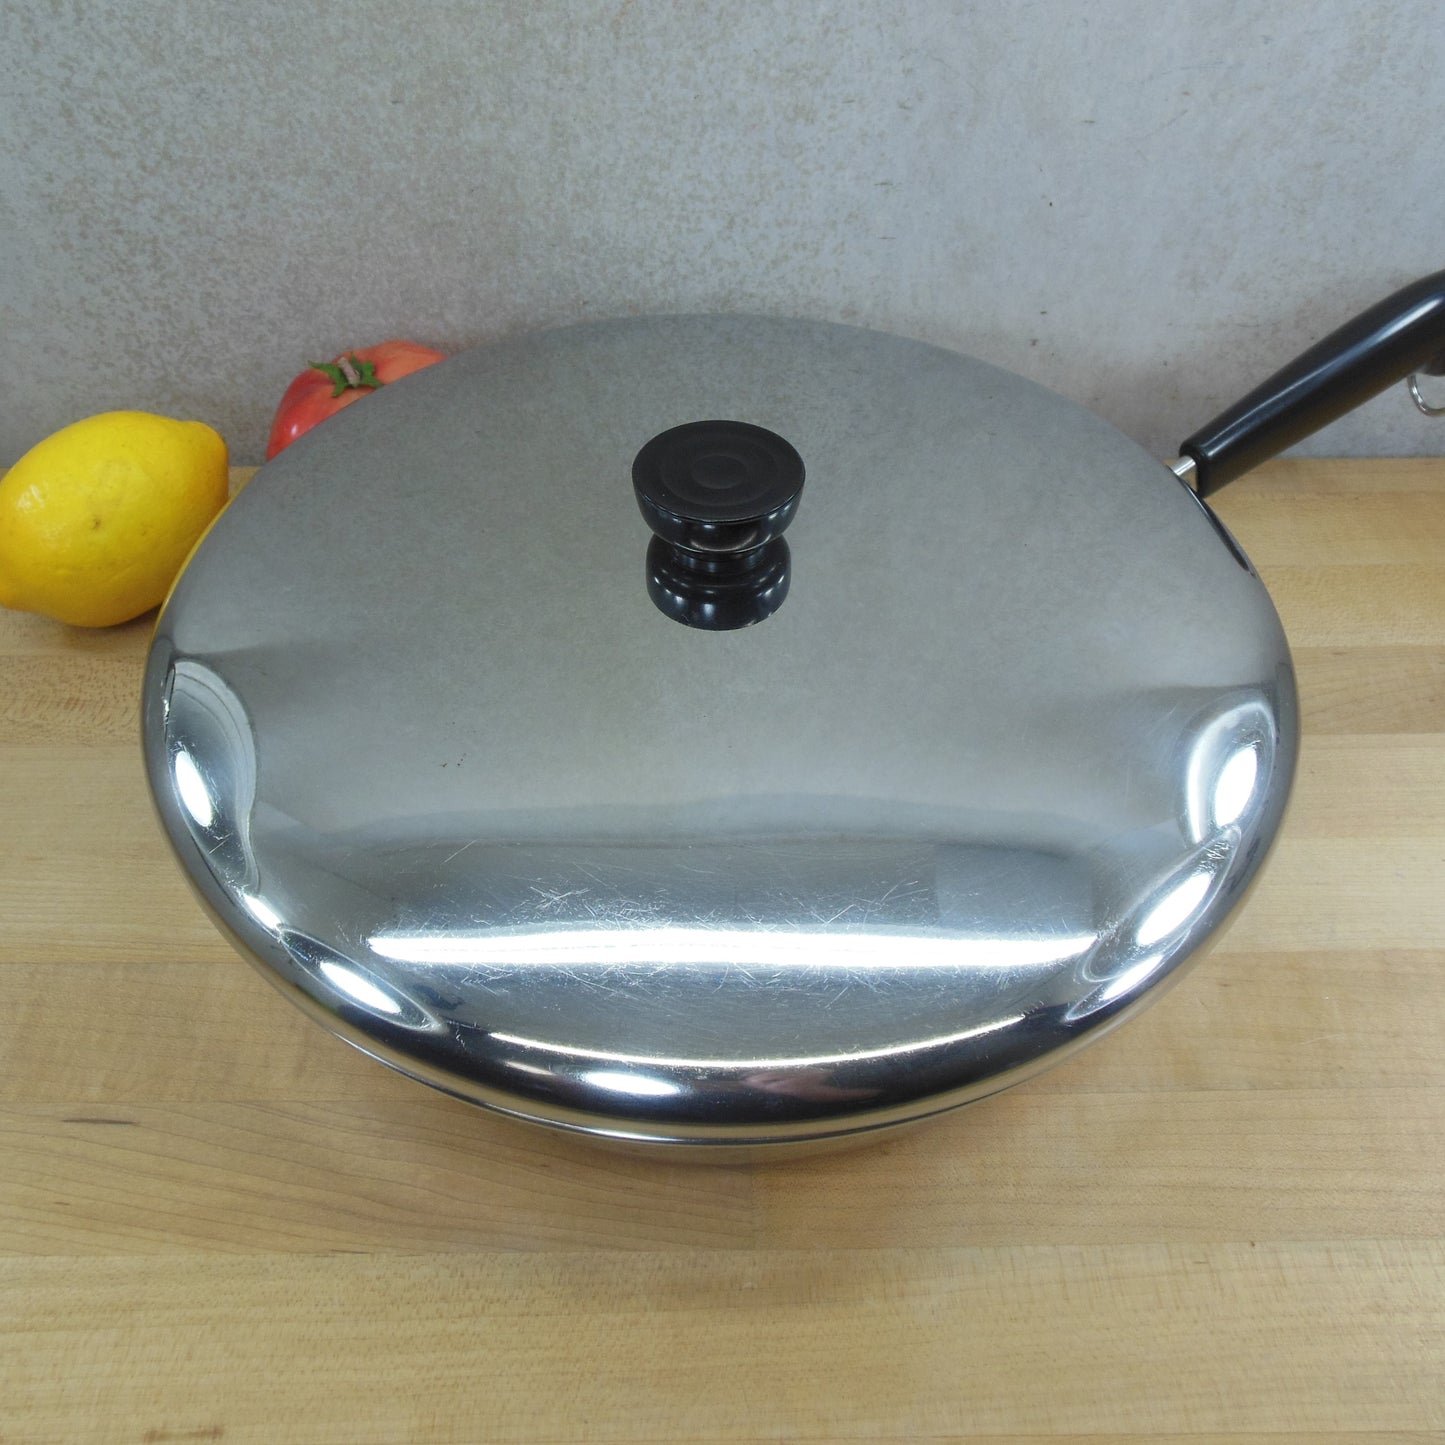 Revere Ware 12" Fry Pan Skillet Chicken Fryer Stainless Copper Clad 1994 Lid Cover